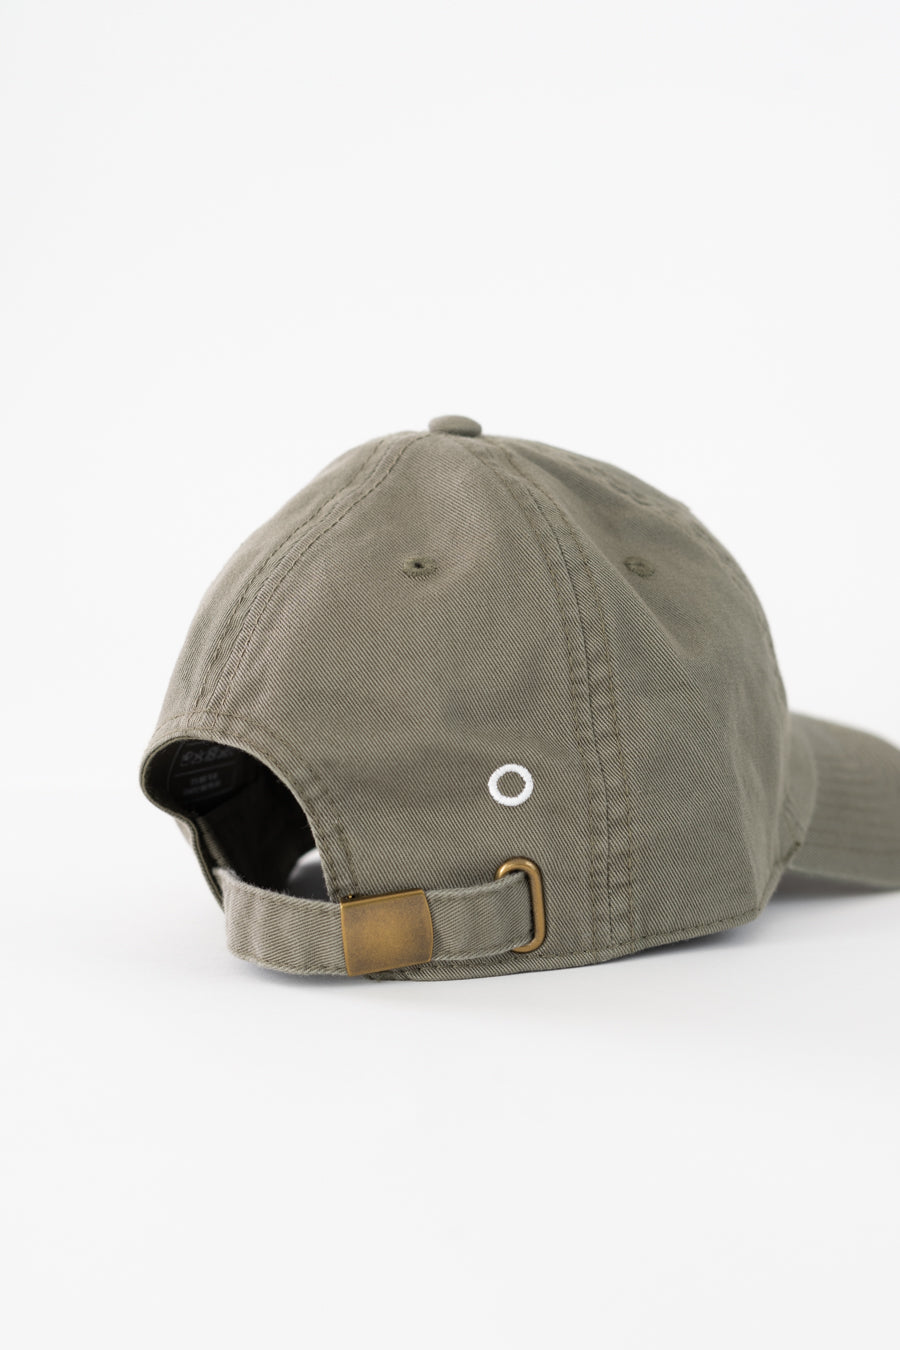 it's okay organic cap khaki | made with organic cotton, embroidered. This is a studio photography of the back of the cap.